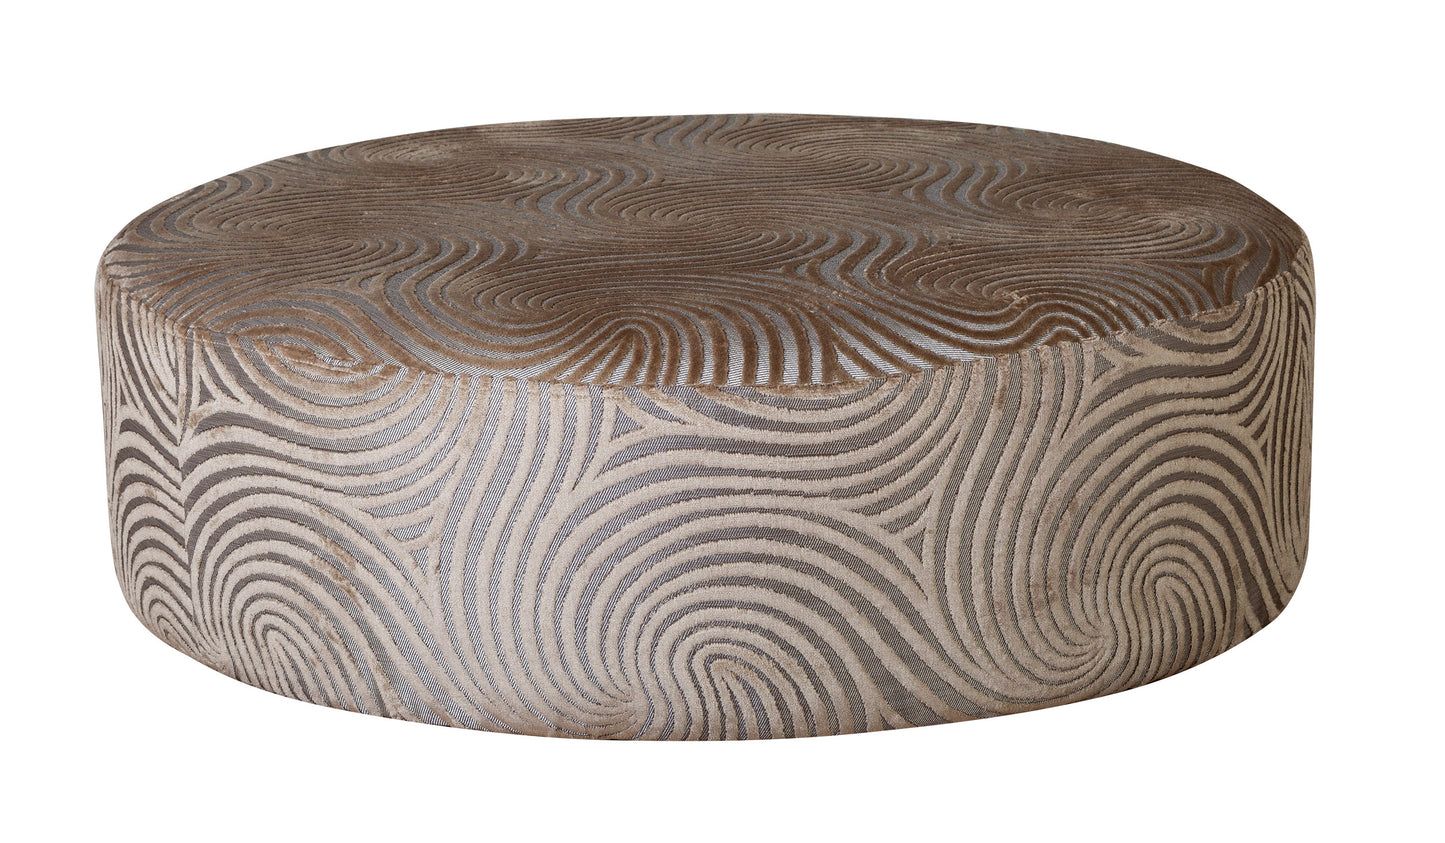 Veda Round Patterned Footstool (Superior)